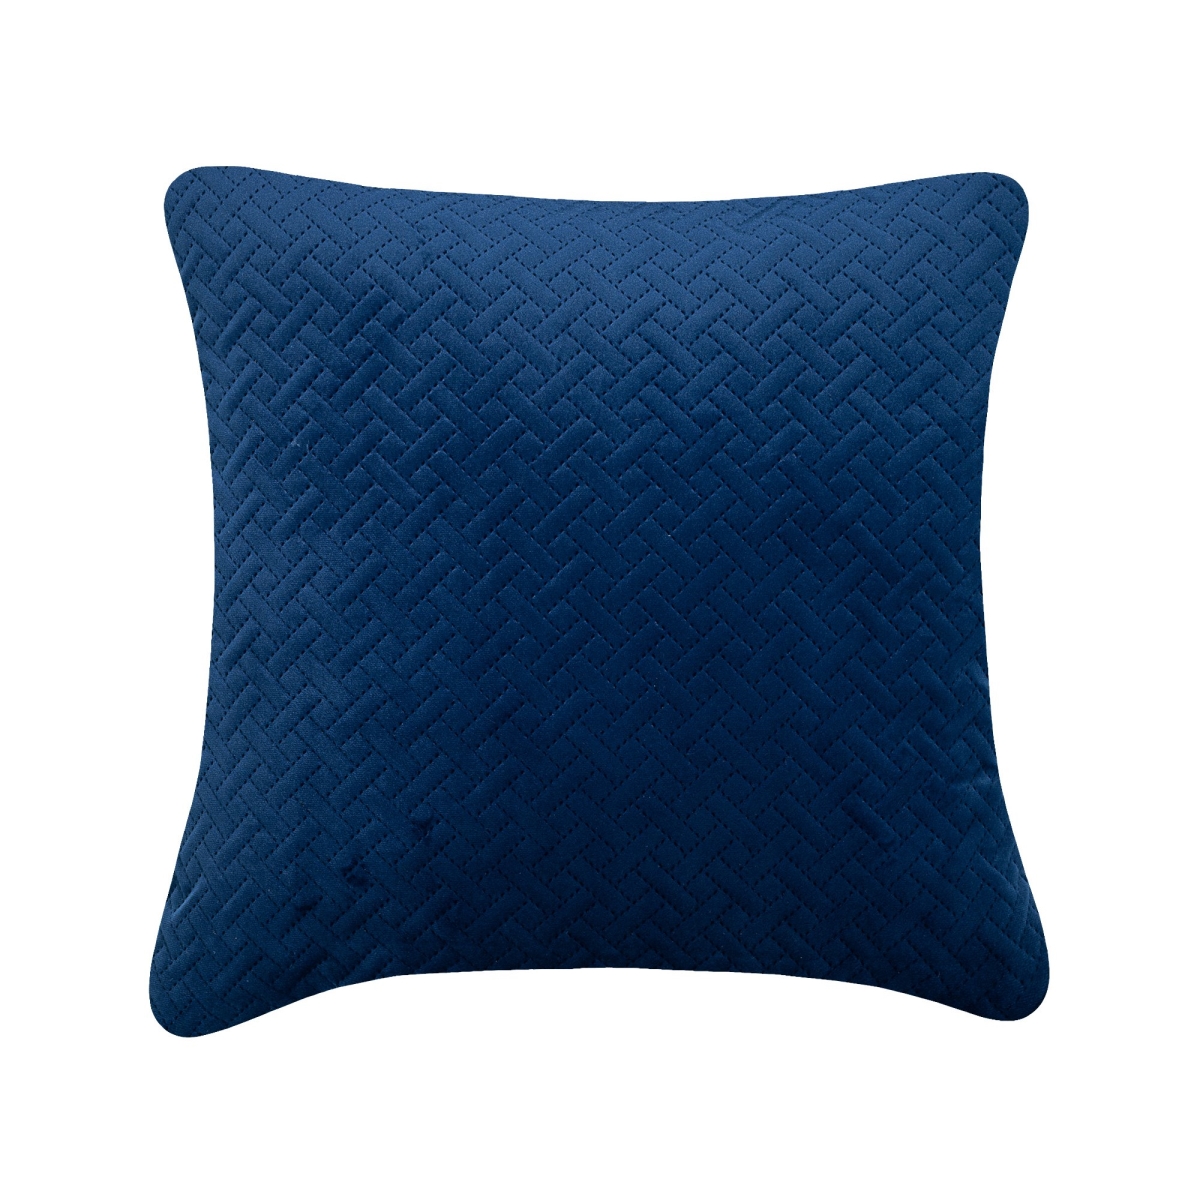 18 X 18 In. Quiltee Decorative Cushion, Navy - 100 Percent Duck Feather